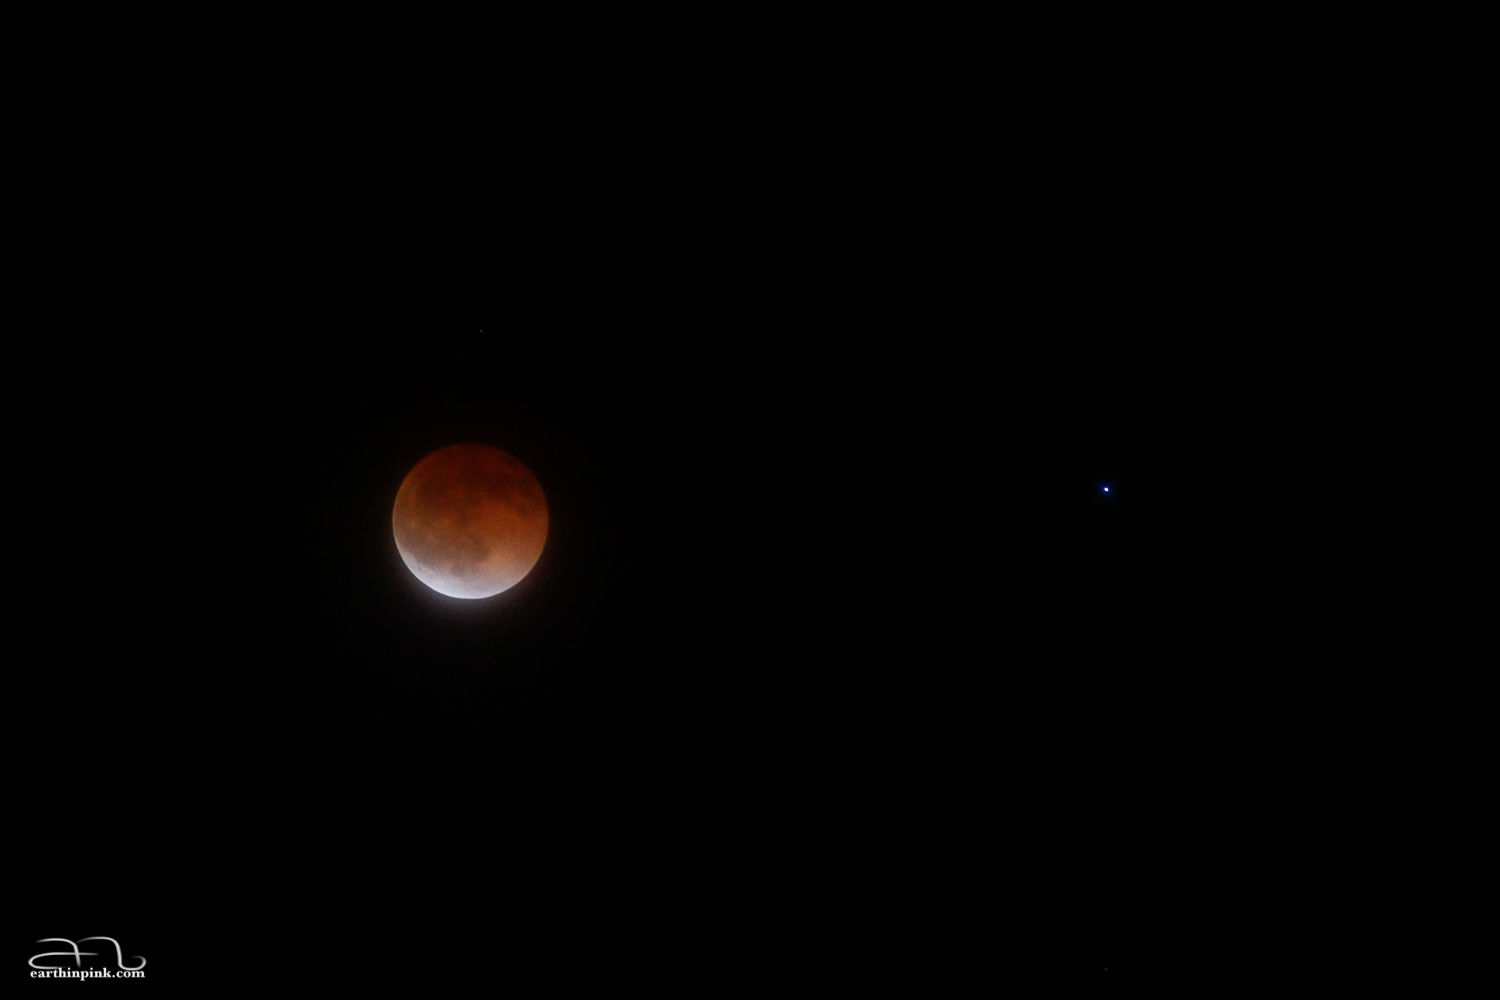 The total phase of the Lunar Eclipse on April 15, 2014. The bright star to the right is Spica in the constellation Virgo. Photographed by Norbi in Menlo Park, CA.